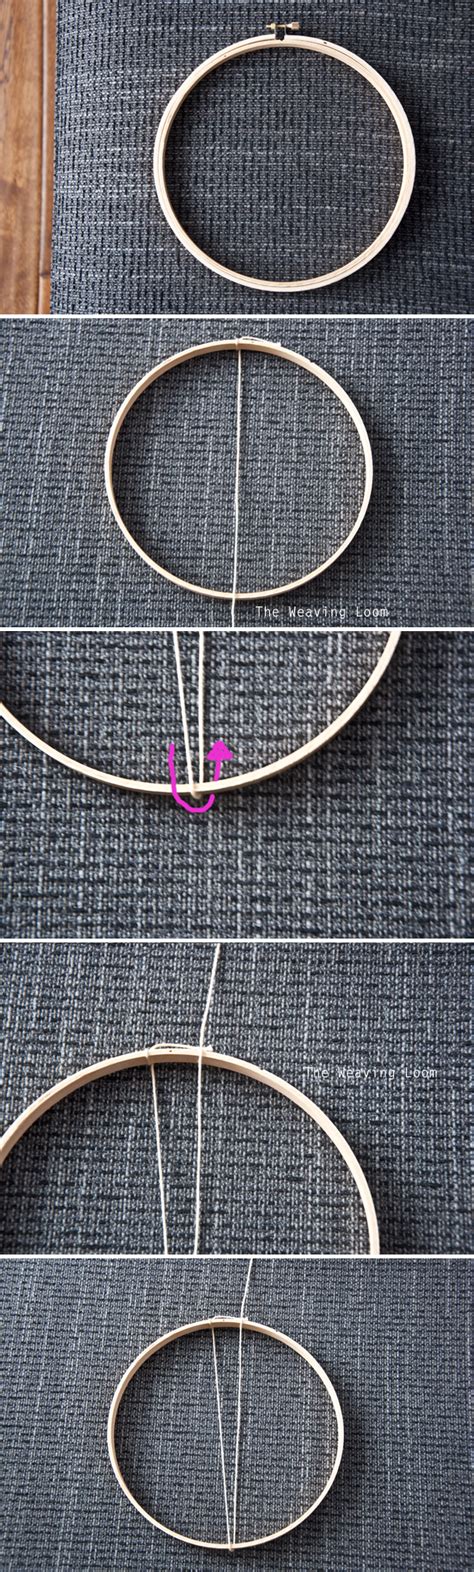 Best Of Weaving Techniques Using An Embroidery Hoop As A Loom The